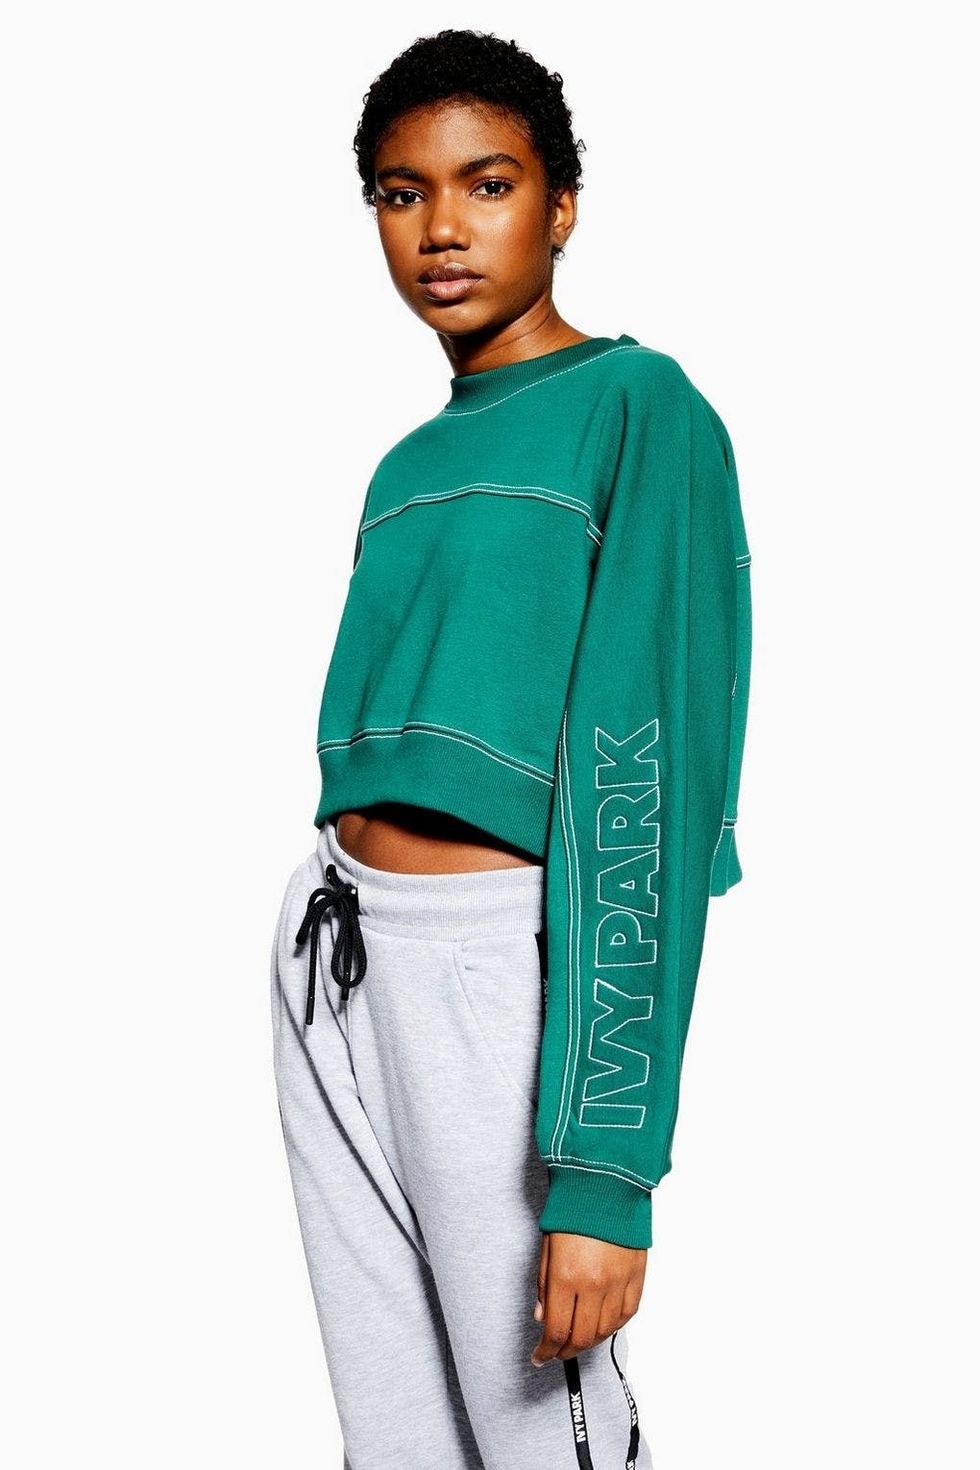 The Coziest ’90s Style Sweatshirts for When You Just Can’t Even - Brit + Co